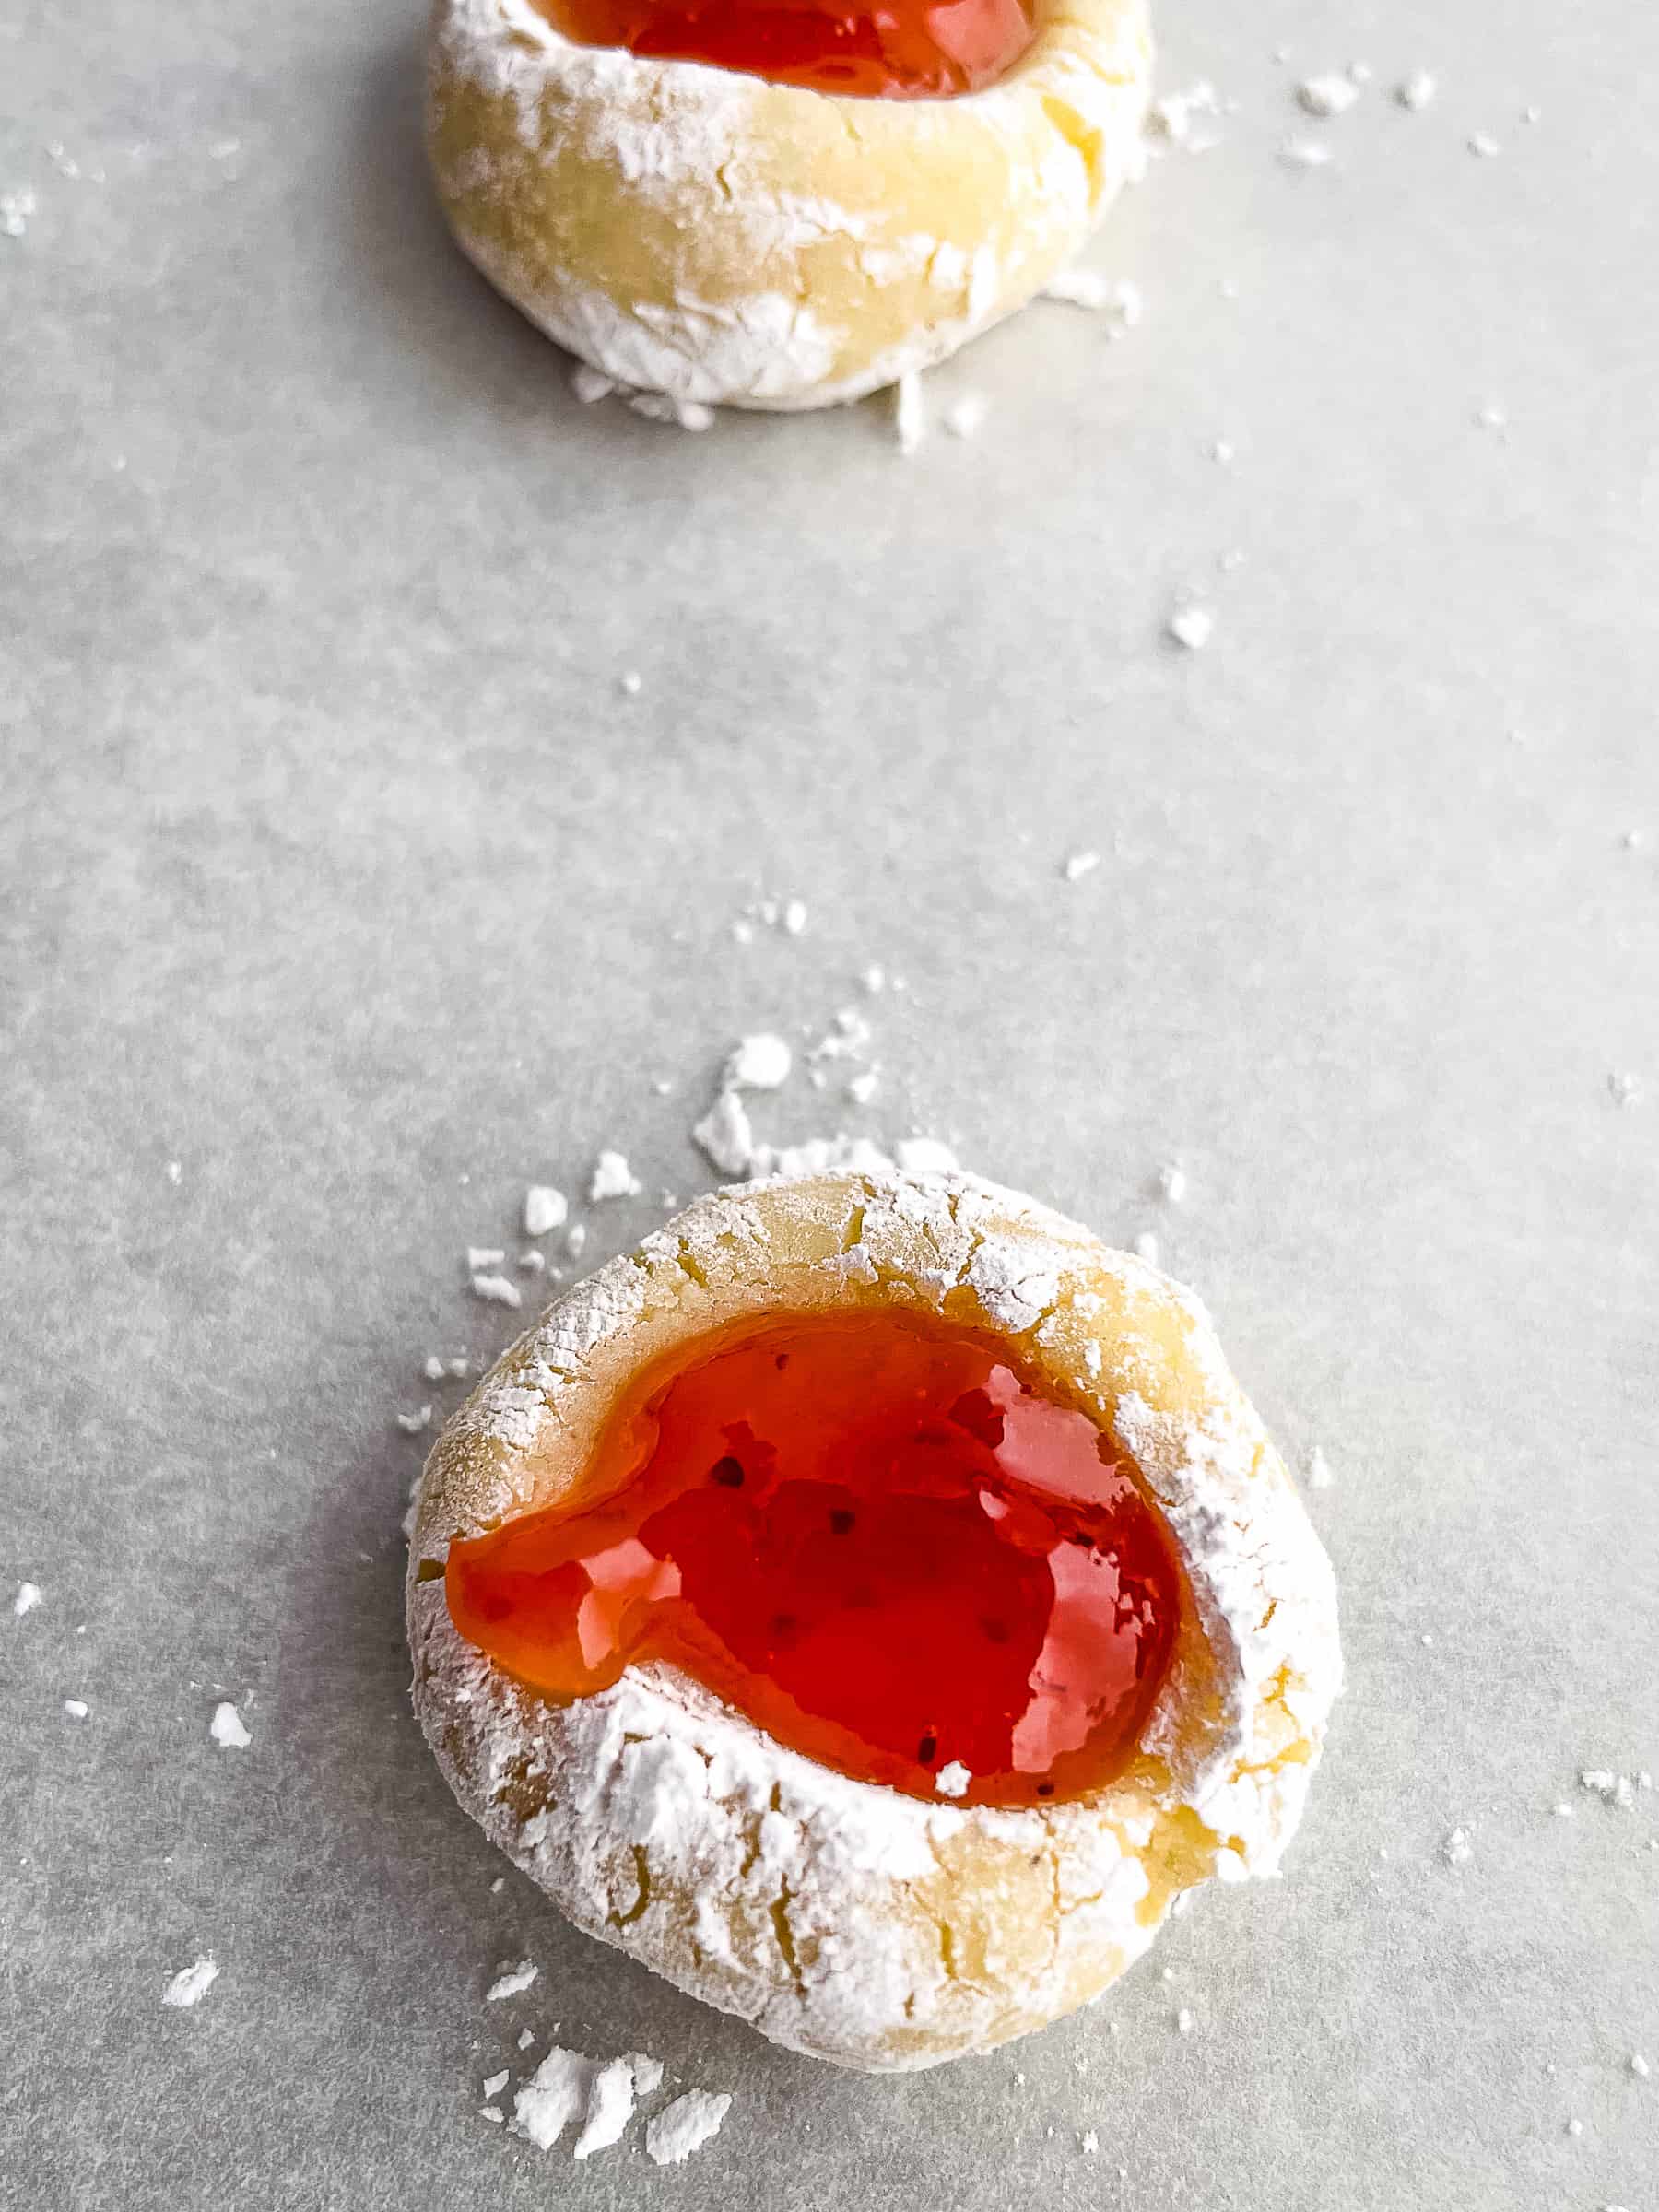 Unbaked gluten-free thumbprint cookie with jam and powdered sugar on baking sheet.